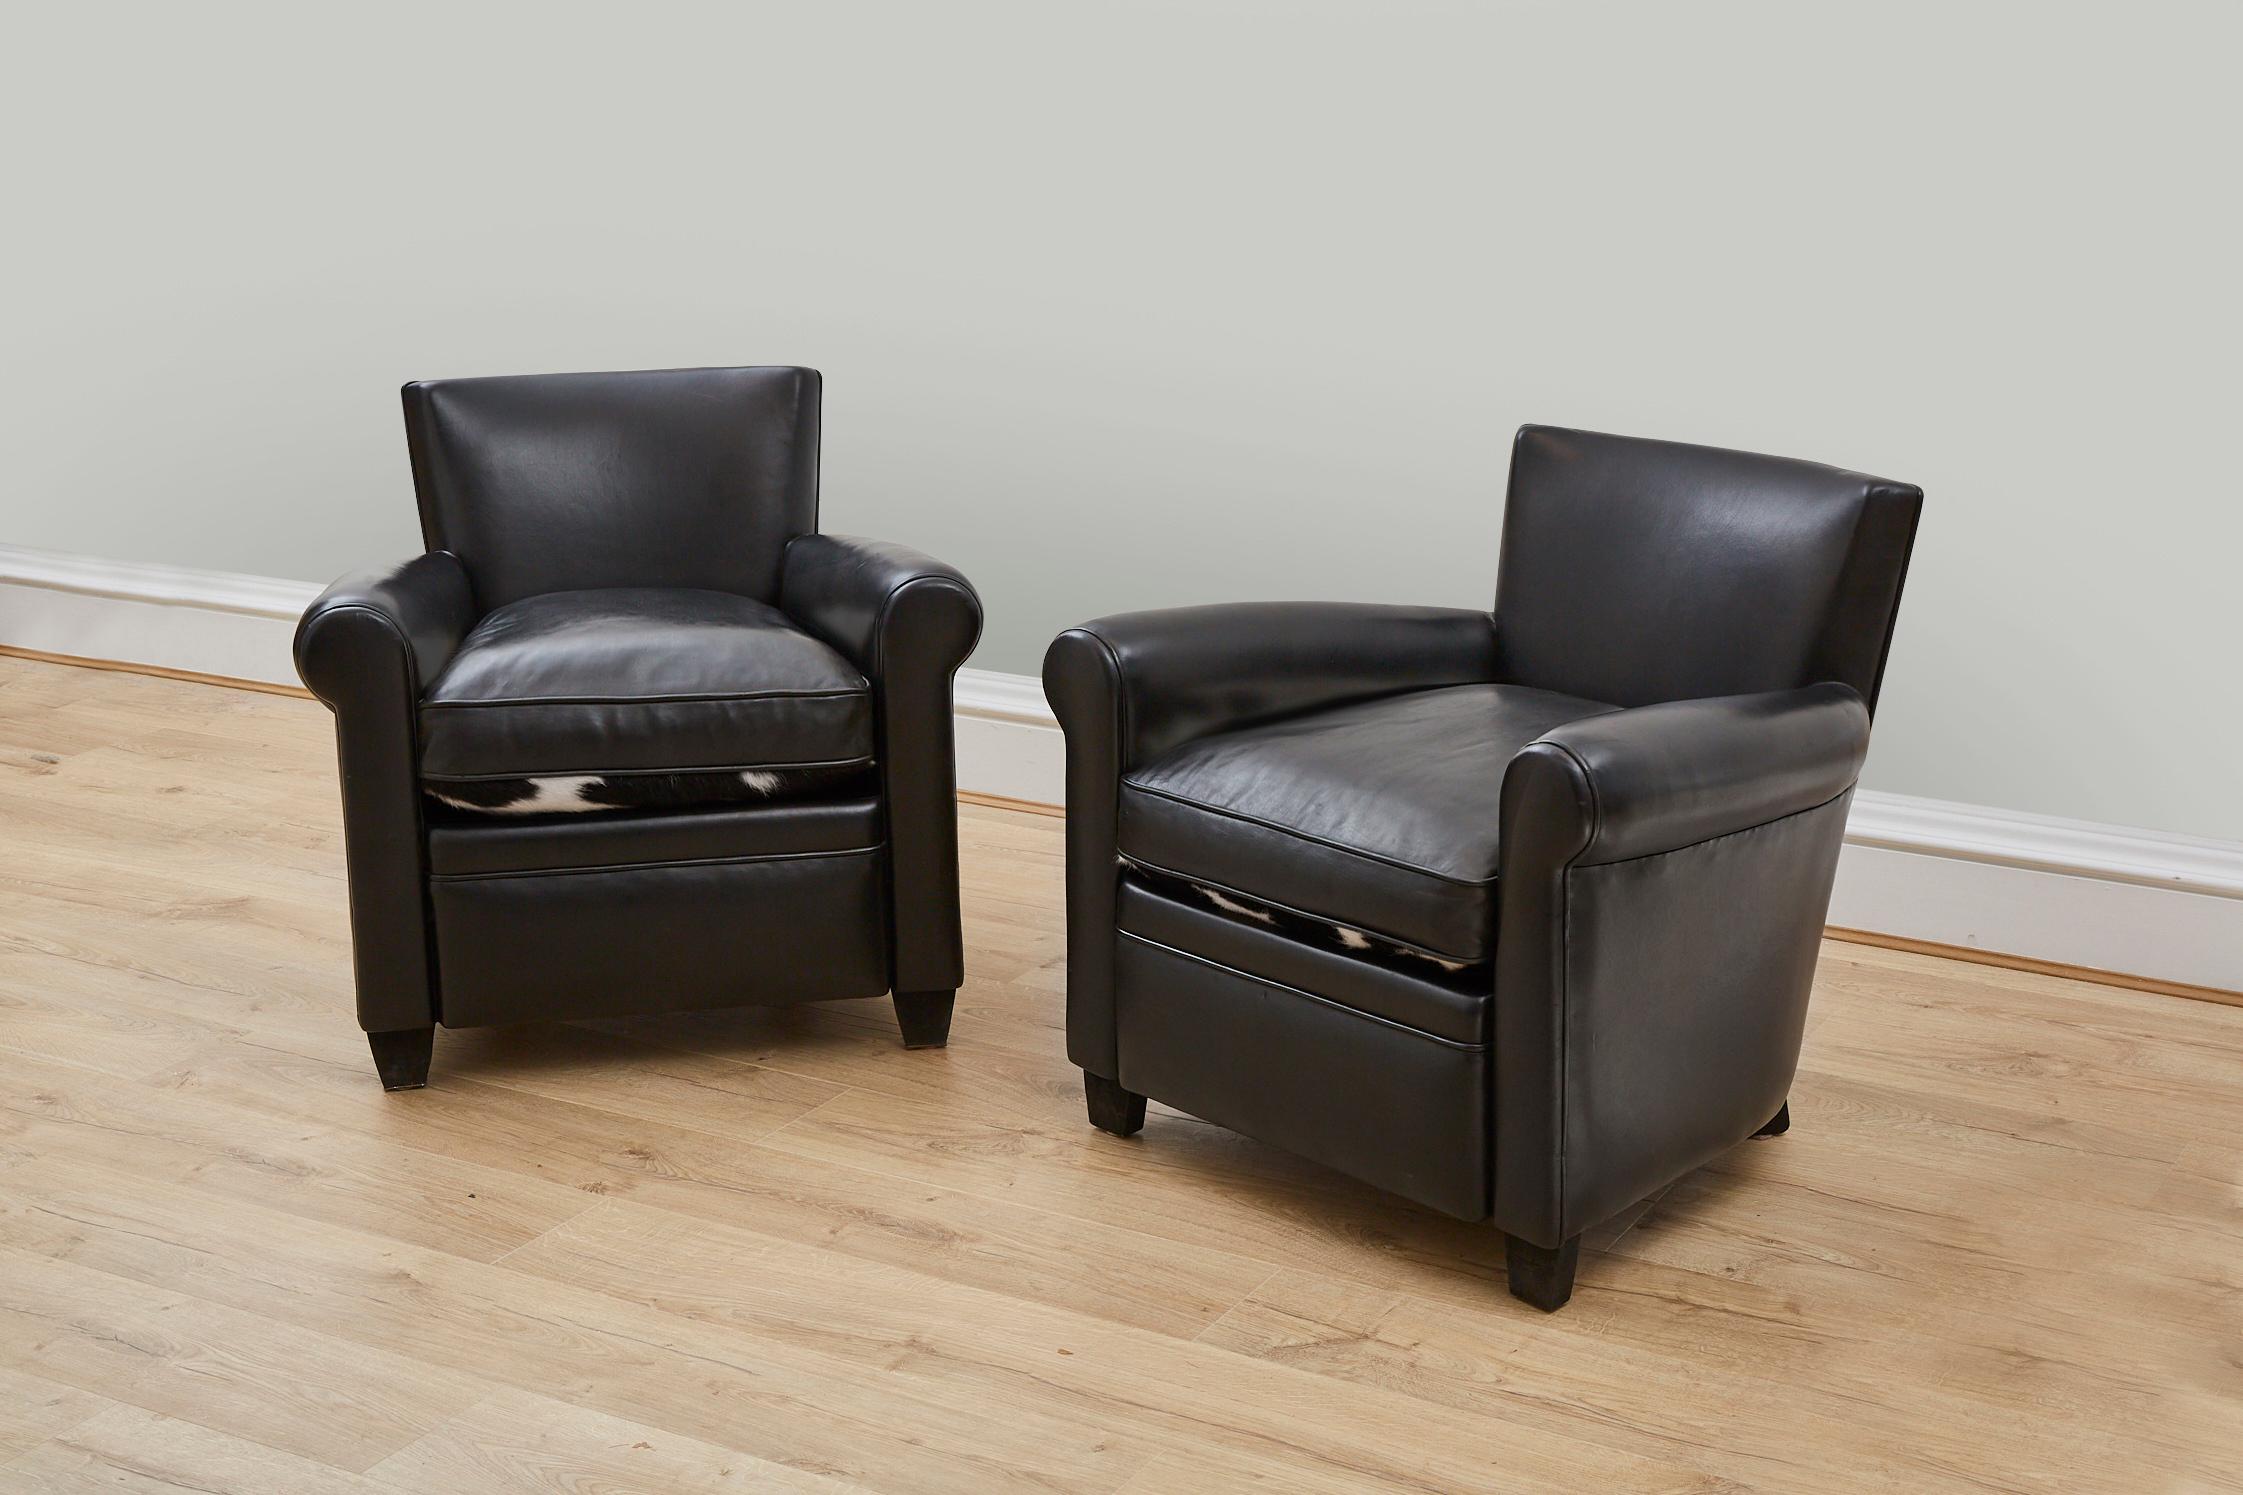 A stylish pair of black leather armchairs featuring reversible seats - black leather on one side with black and white natural cow hide to the other. 

These chairs have been hand made with traditional methods - steel studded detail to the back of